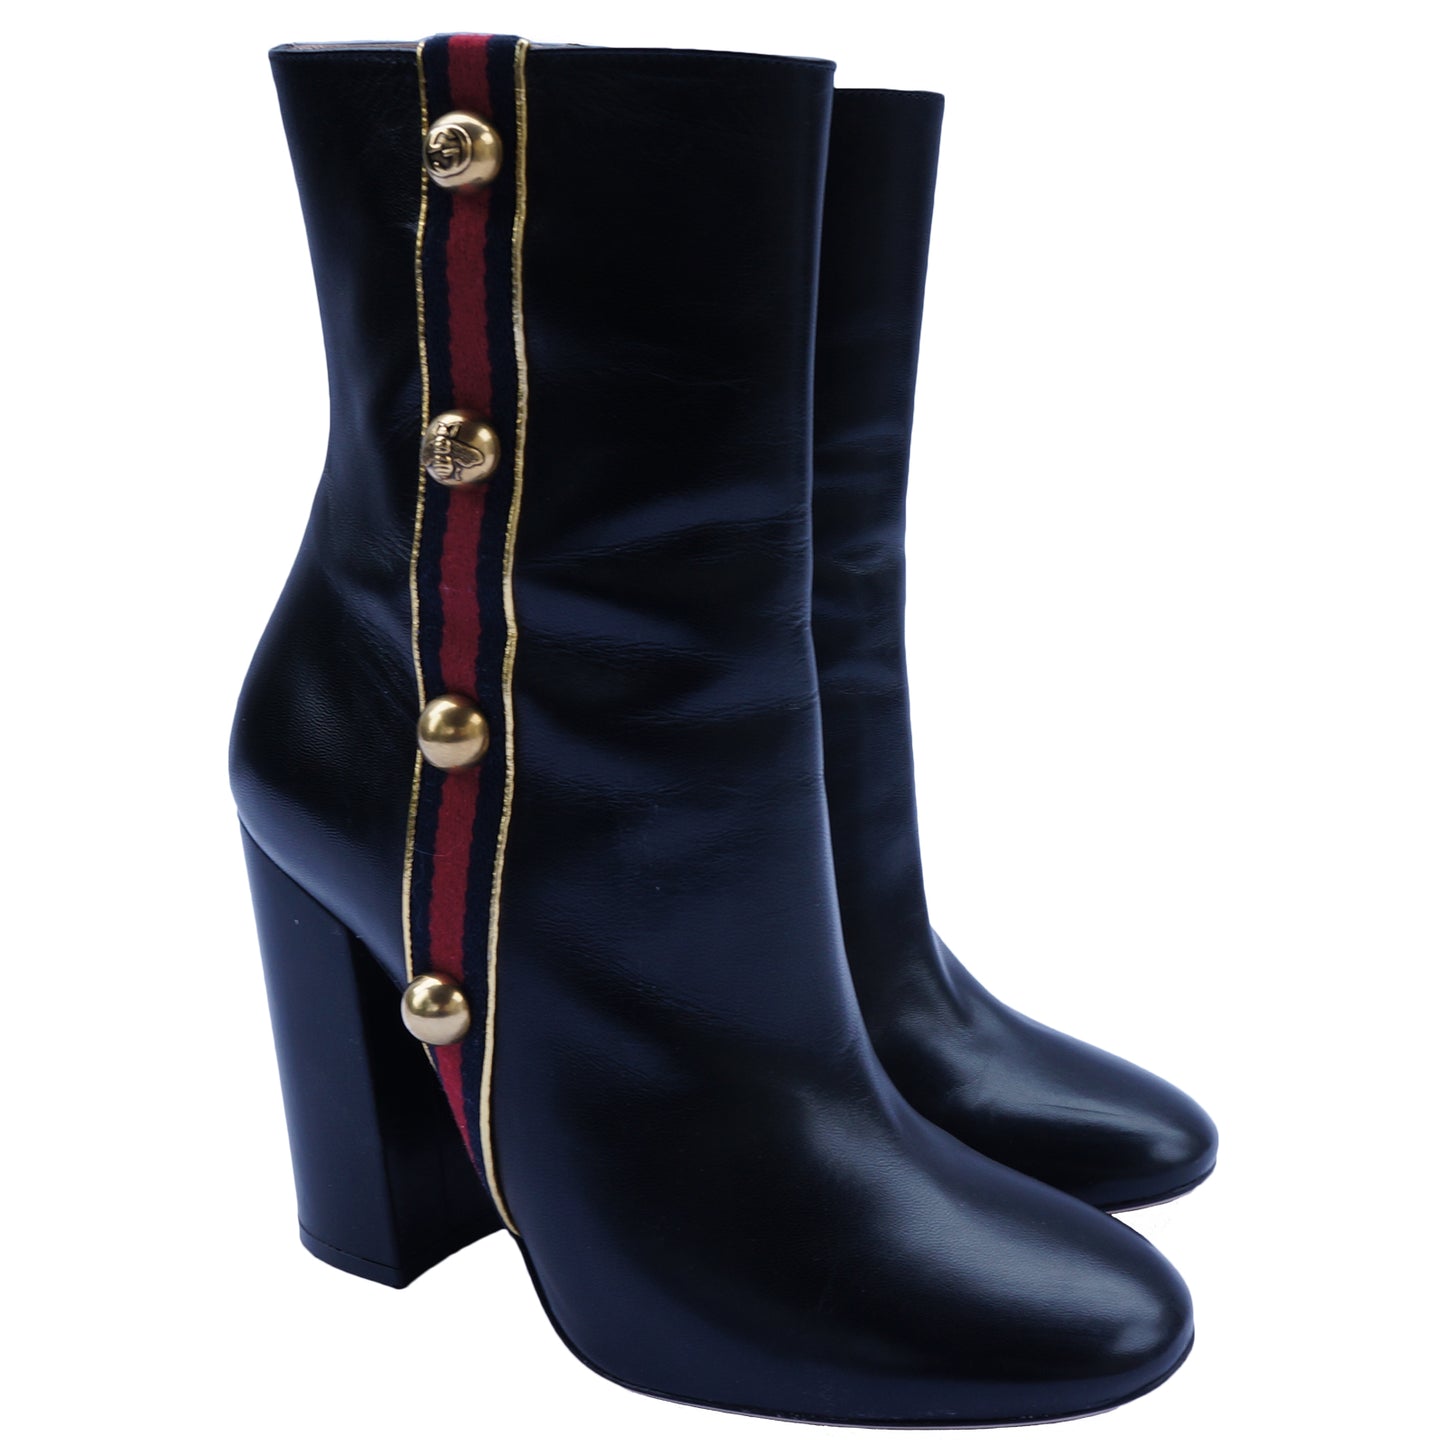 GUCCI CARLY LEATHER STUDDED GROSGRAIN TRIM BOOTS - leefluxury.com